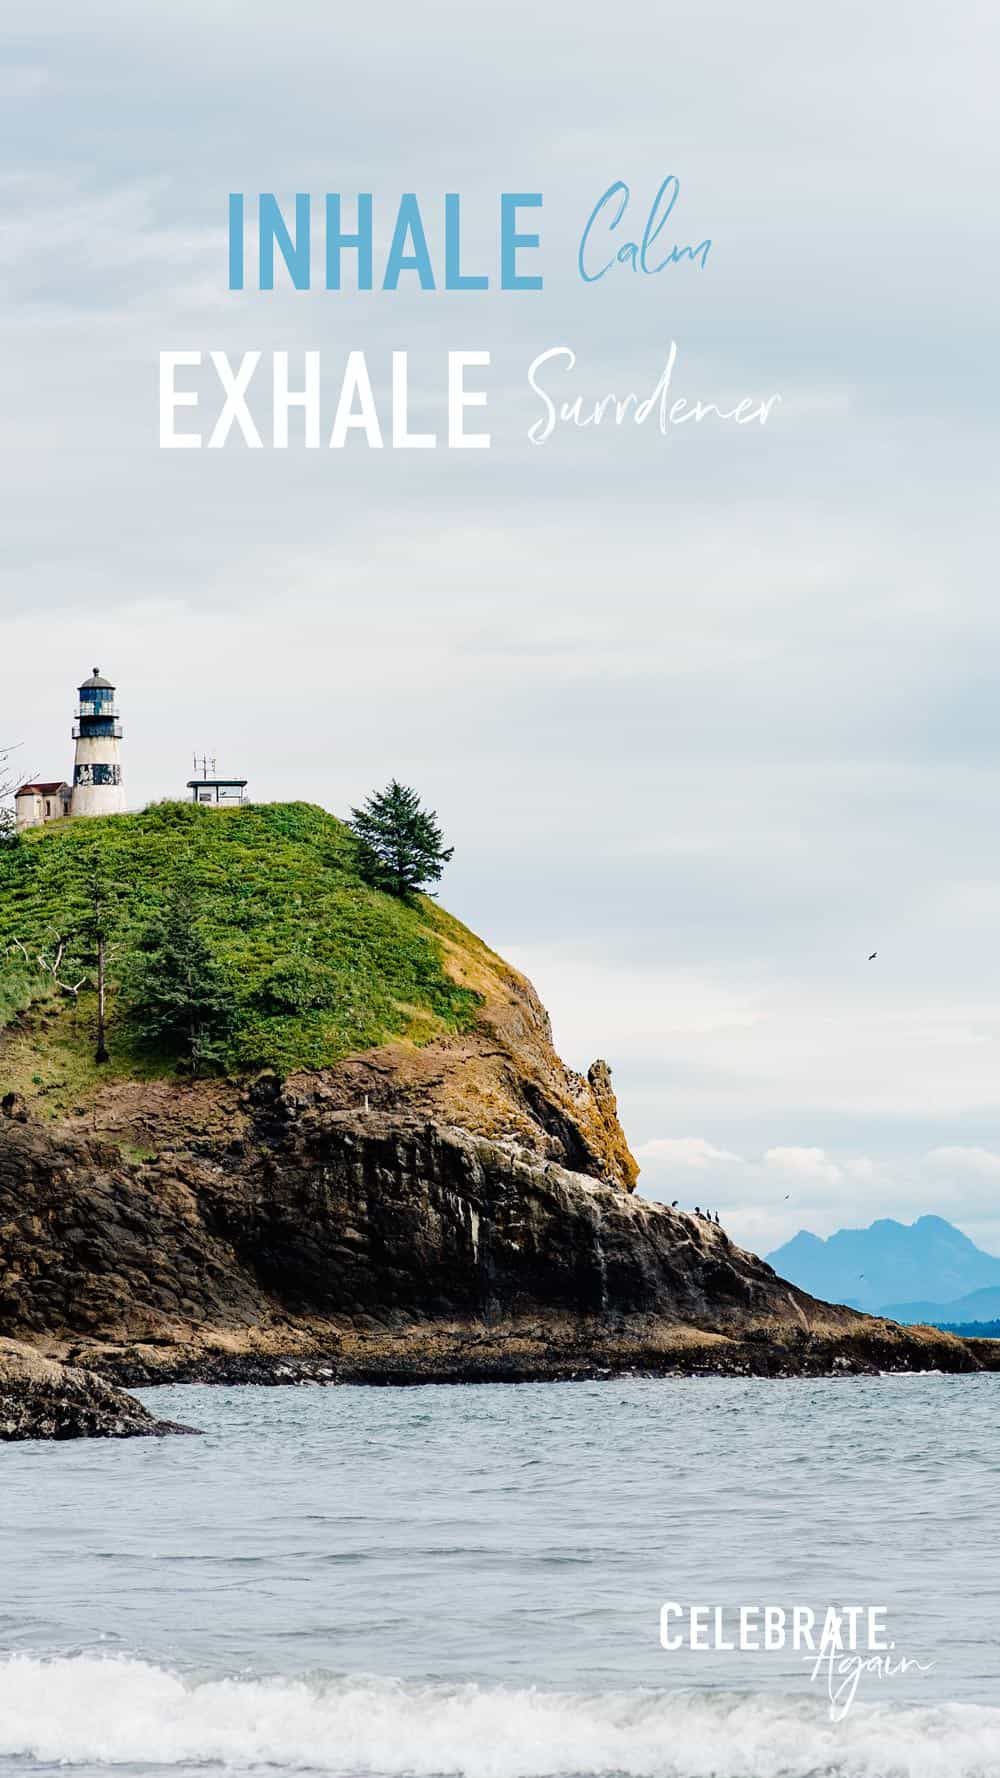 beach with mountain rock and lighthouse in the back ground with text that says "inhale calm exhale surrender"